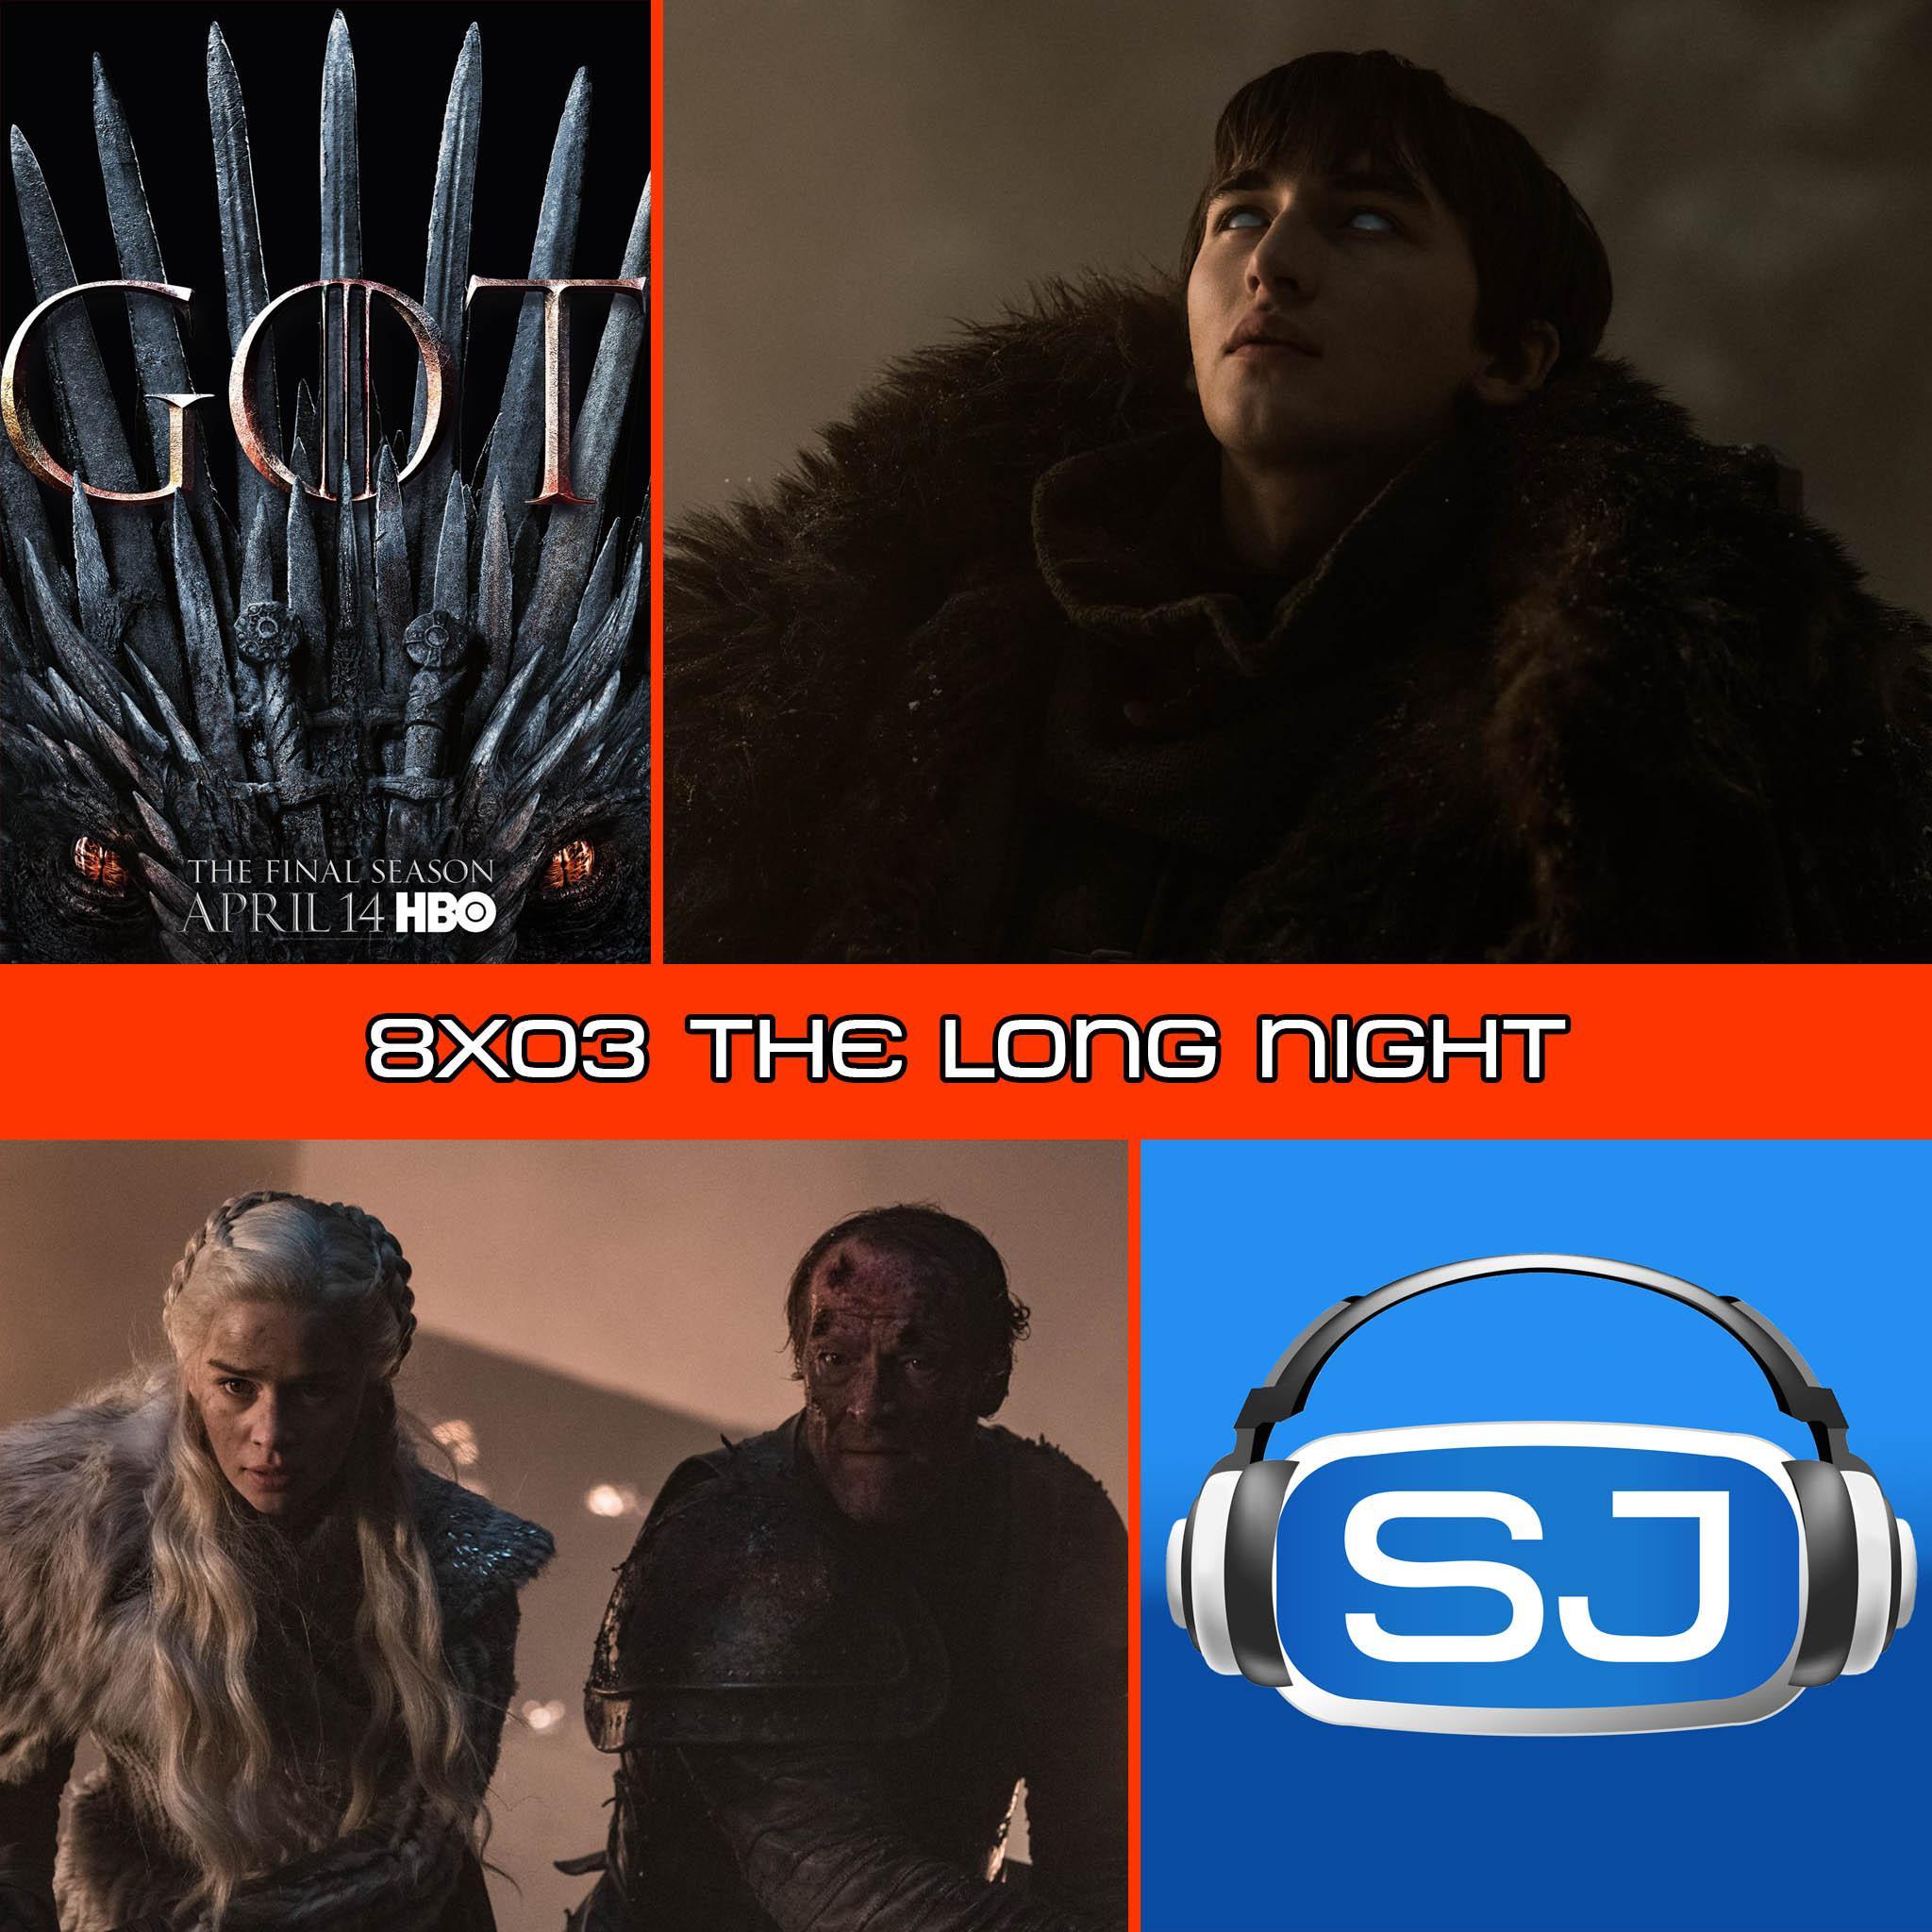 Game of Thrones 8x03 The Long Night